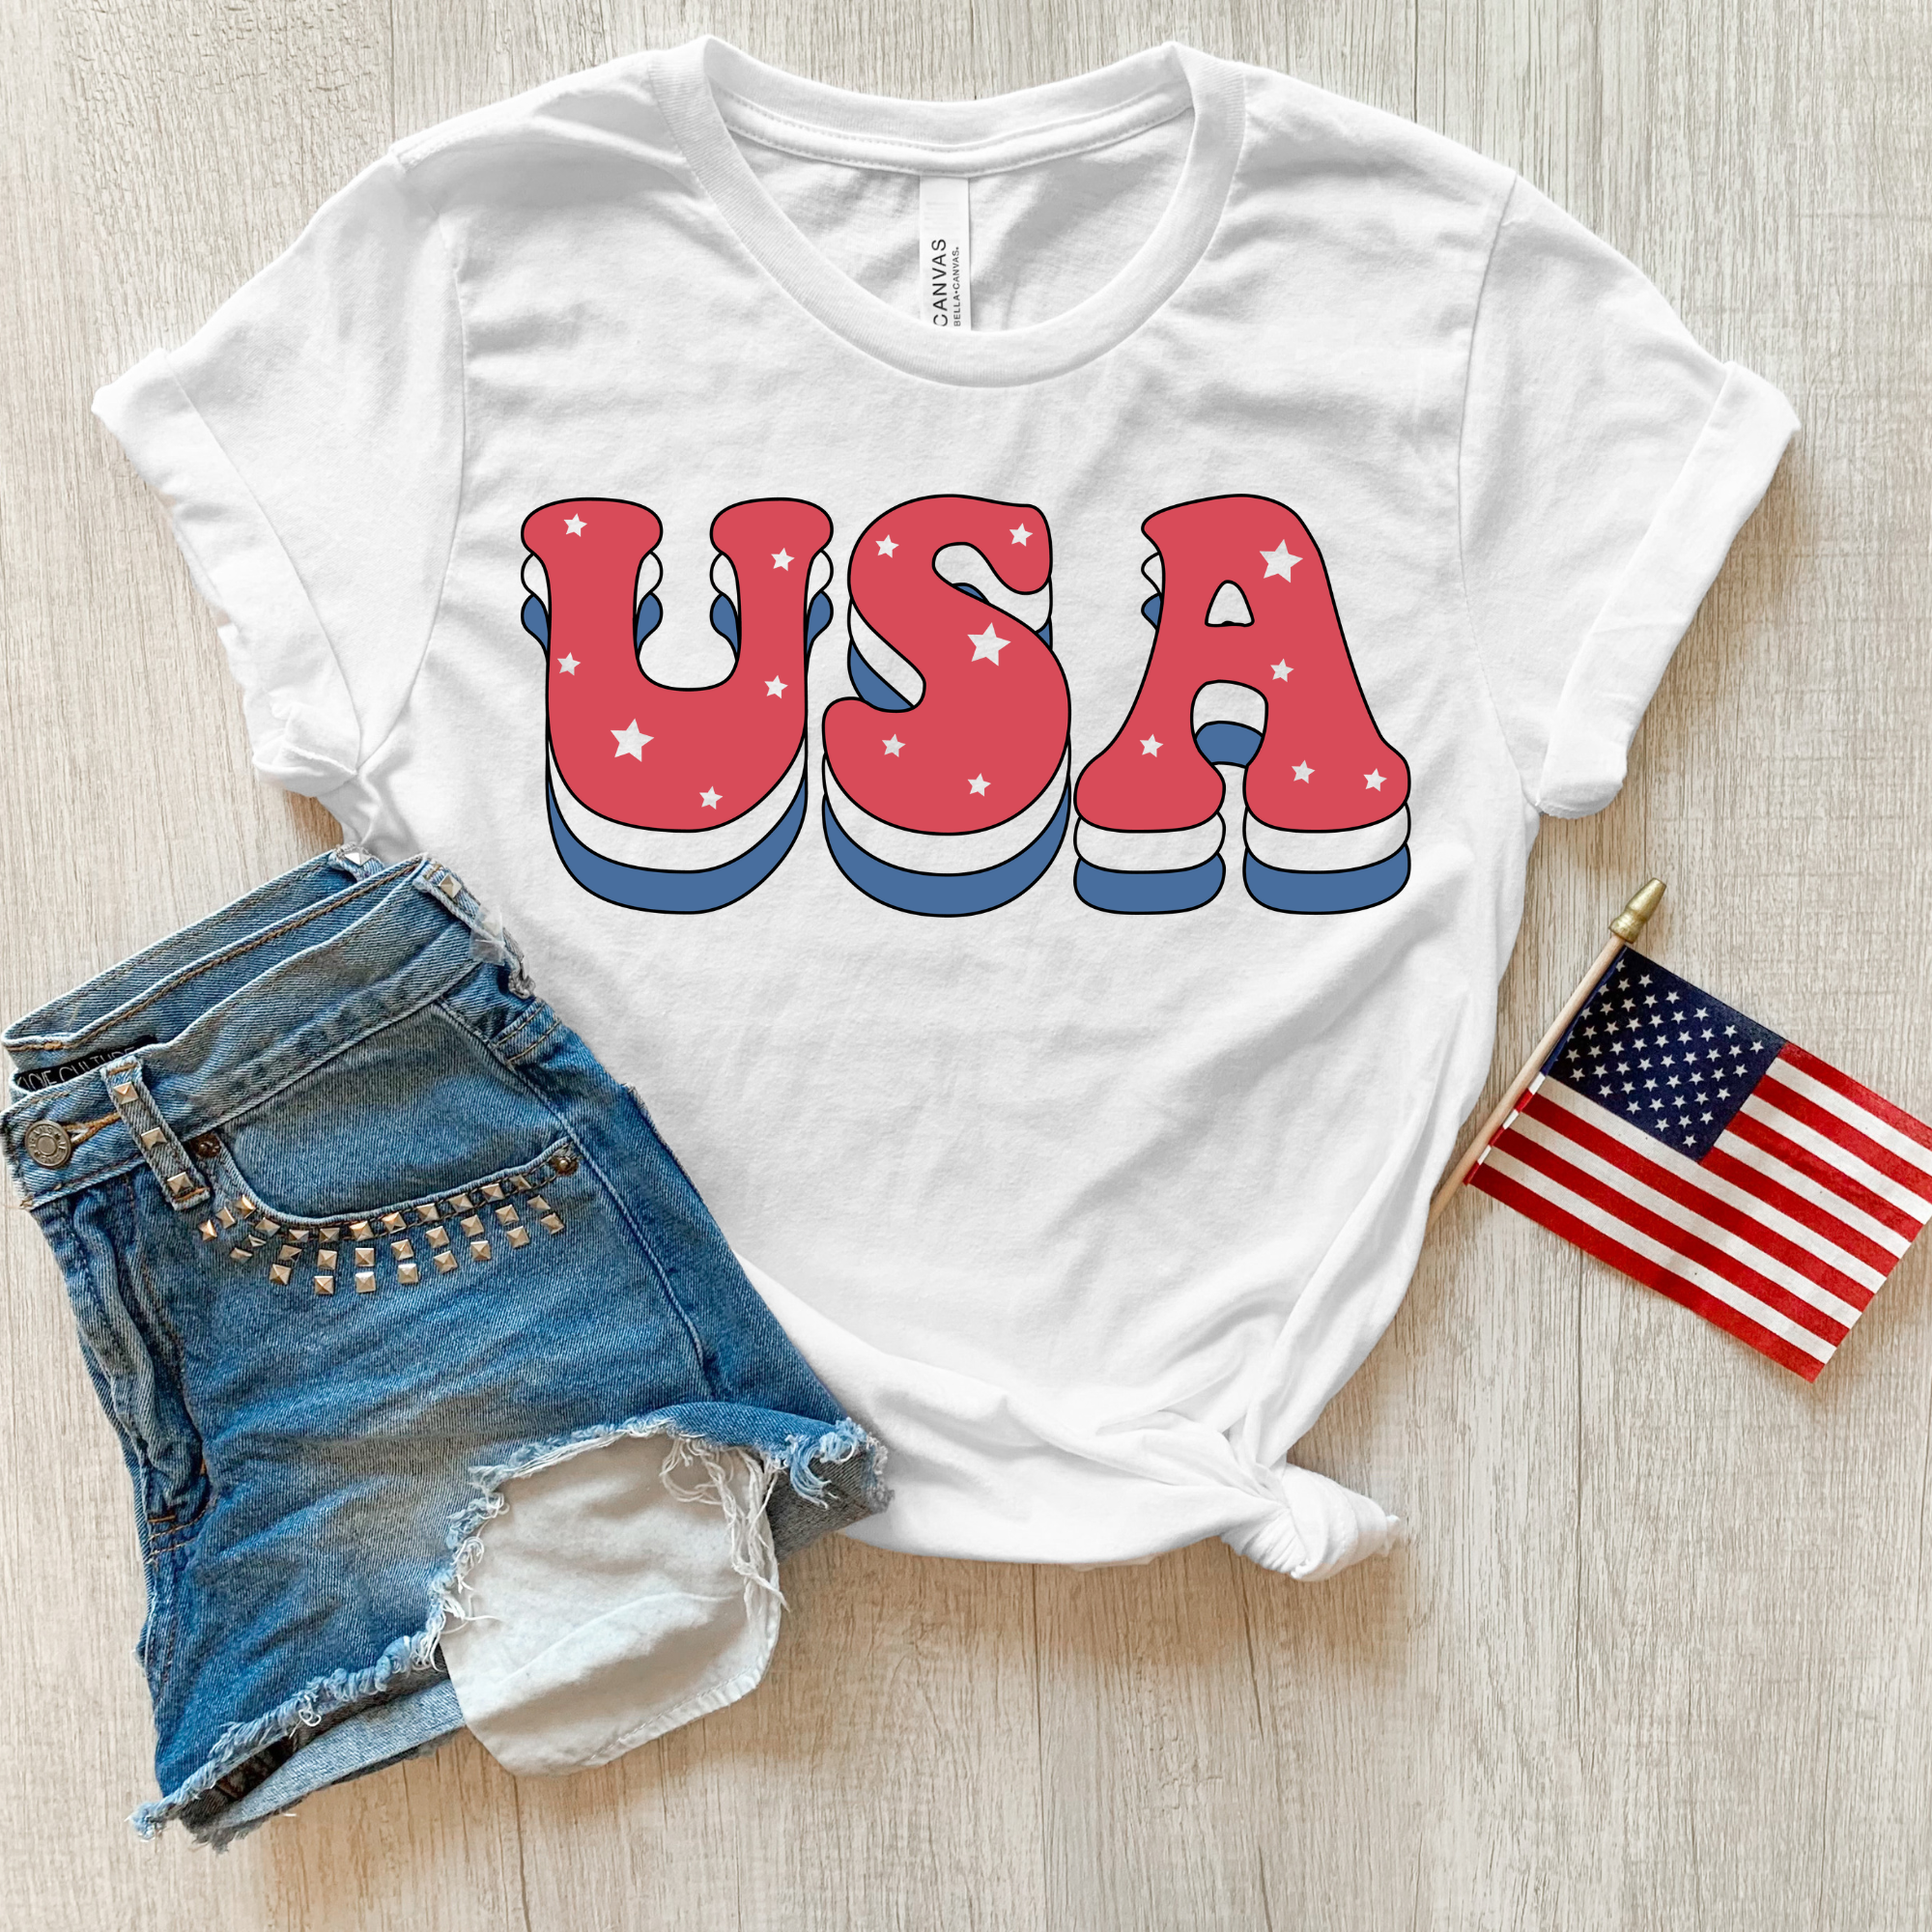 USA Bubble T Shirt for 4th Of July *UNISEX FIT*-Graphic Tees-208 Tees Wholesale, Idaho